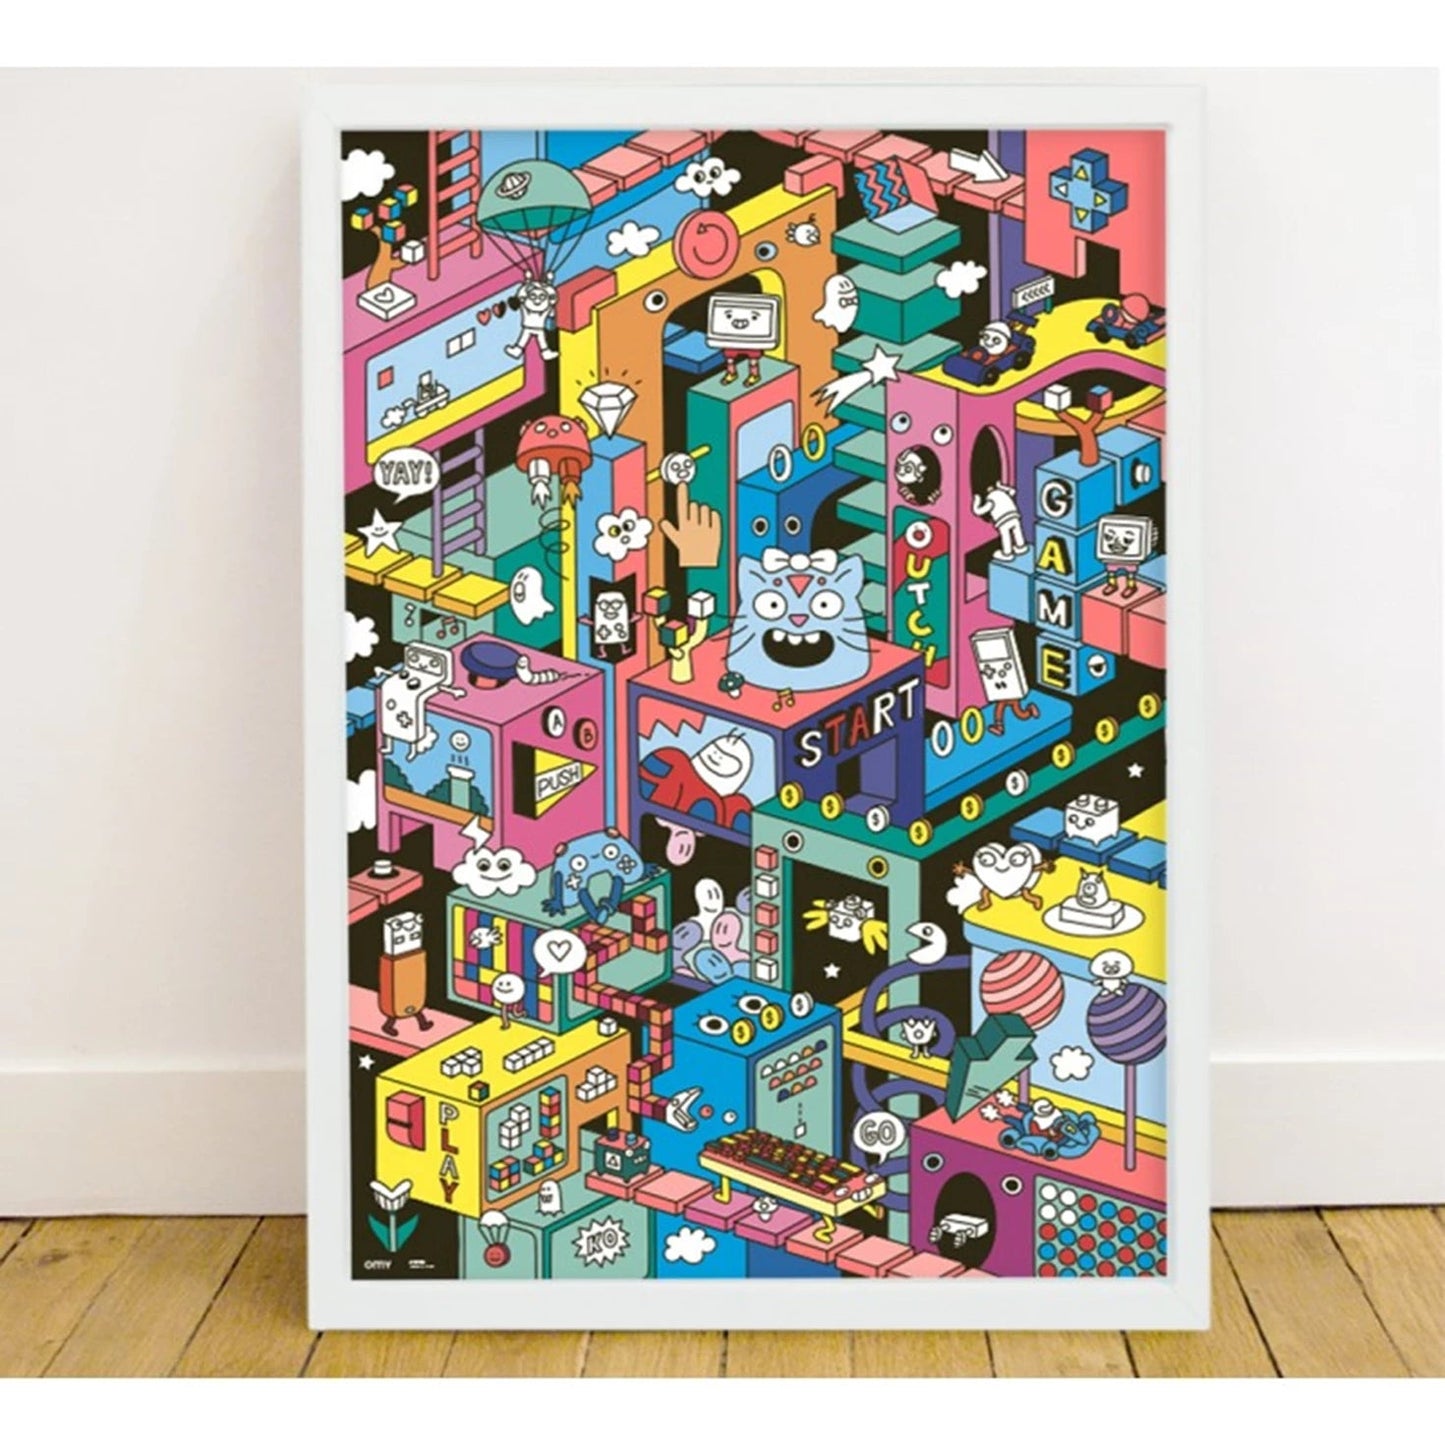 Omy - Video game - Giant poster and stickers 70 x 100 cm - Playlaan